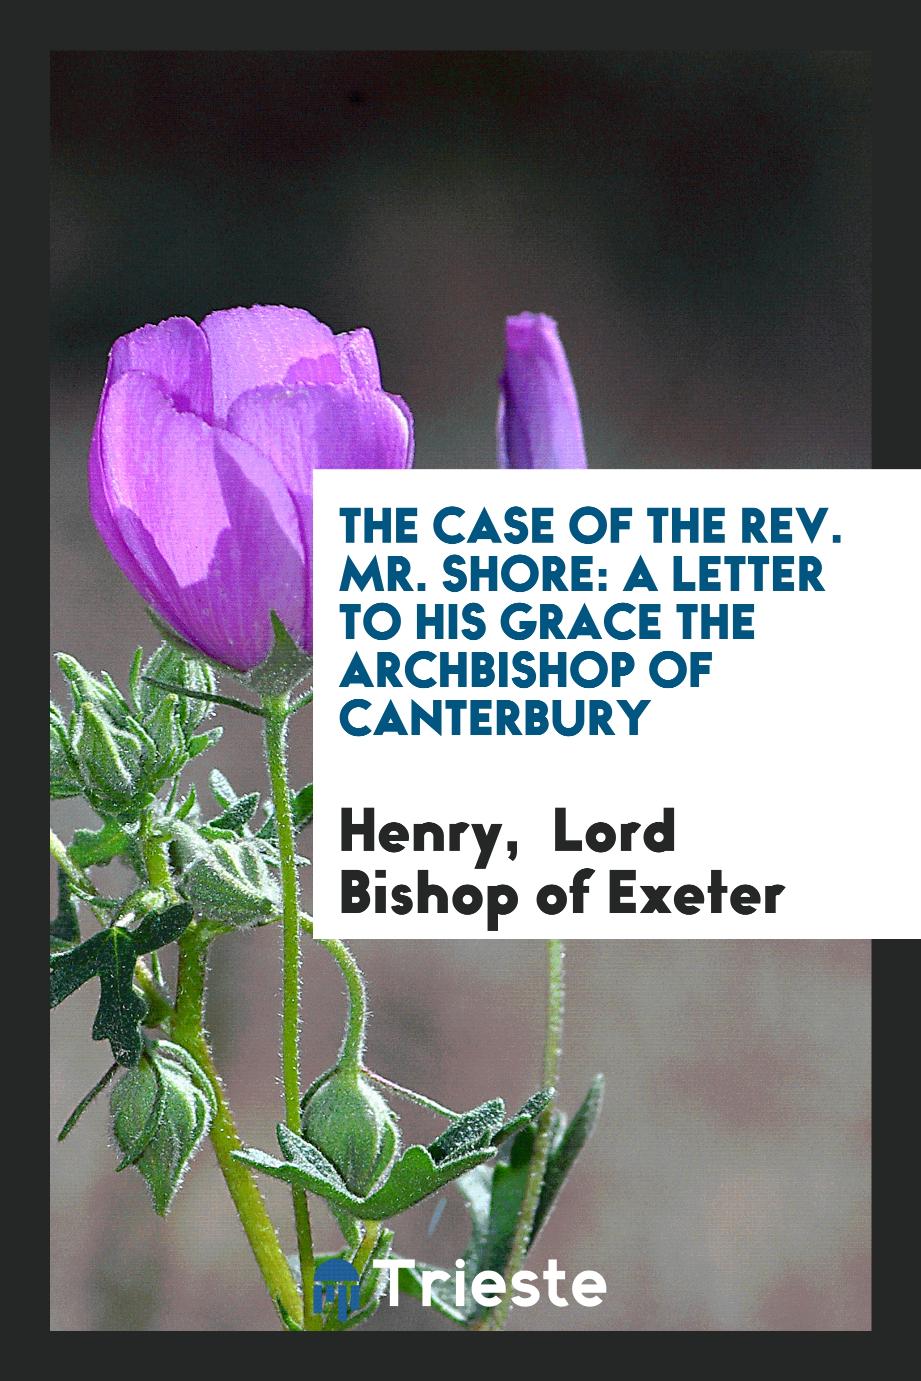 The Case of the Rev. Mr. Shore: A Letter to His Grace the Archbishop of Canterbury